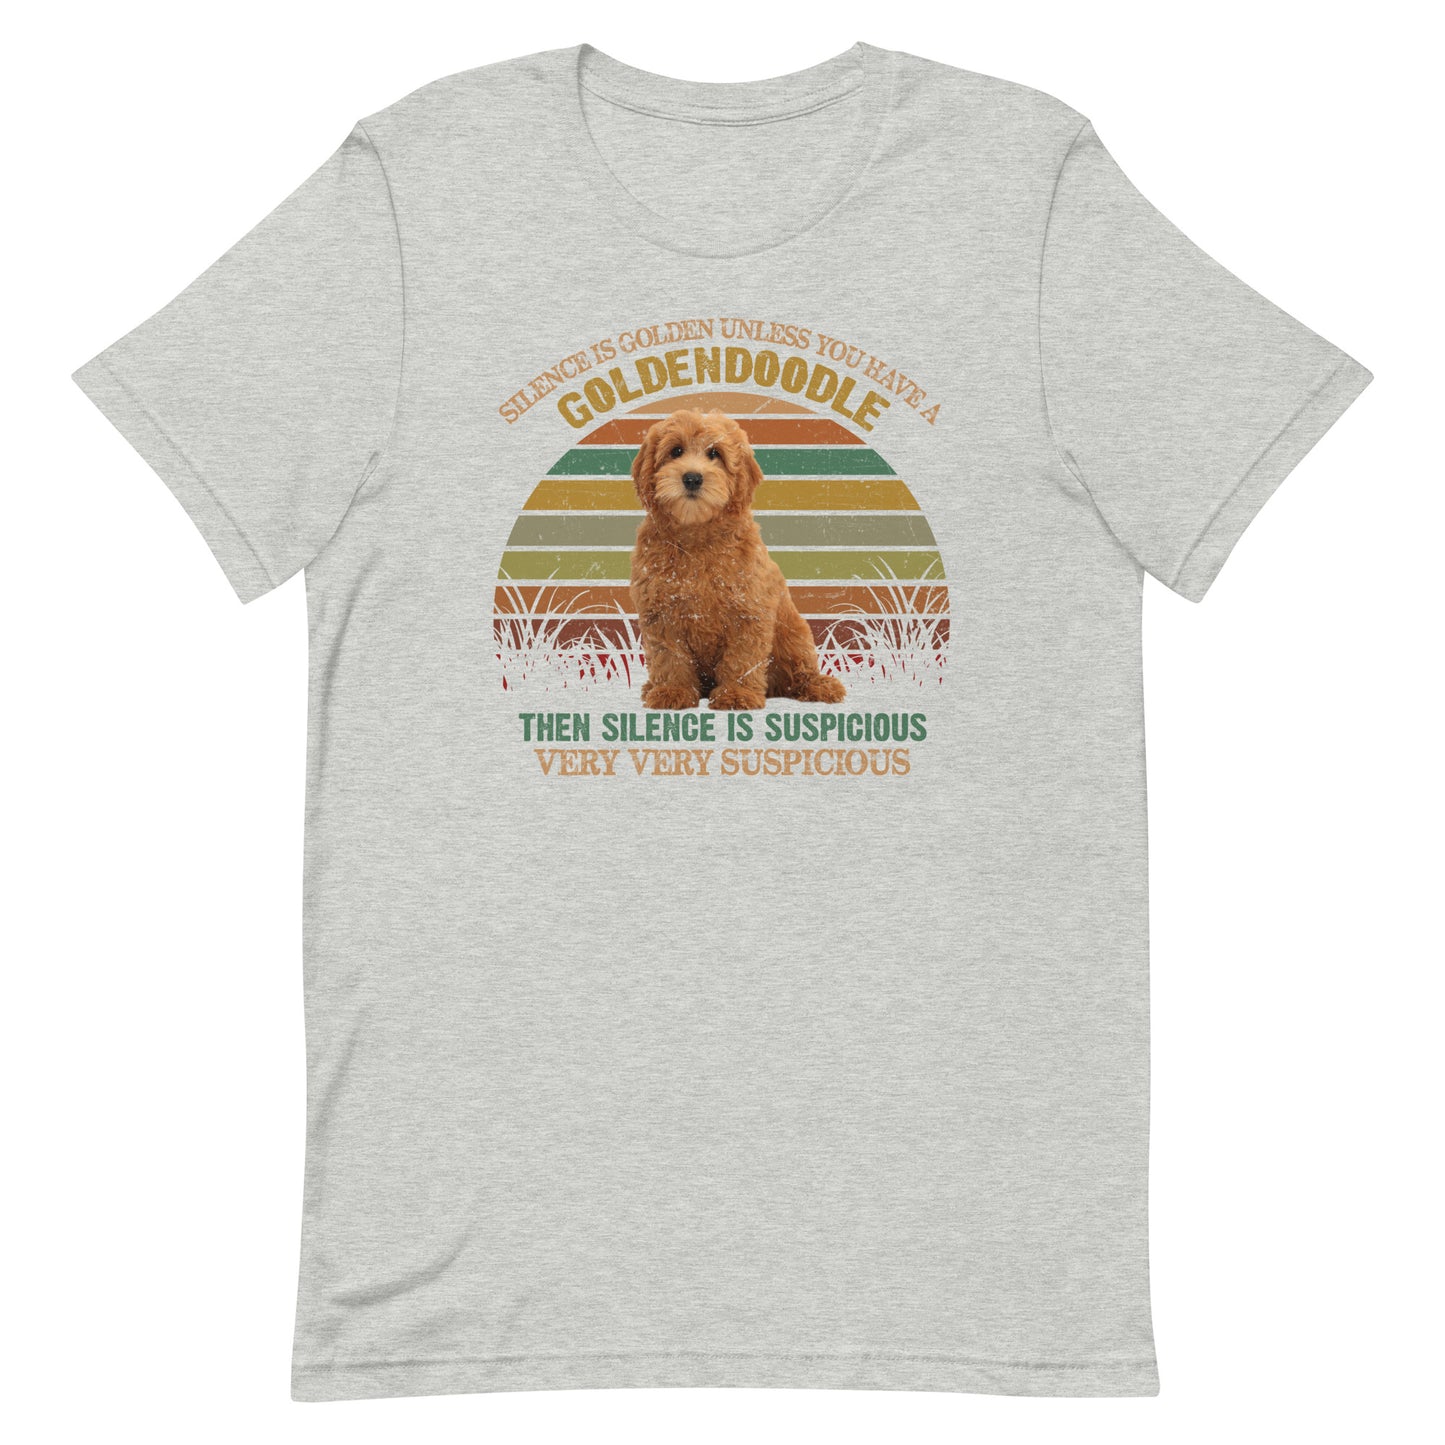 Silence is Golden Unless You Have a Goldendoodle T-Shirt